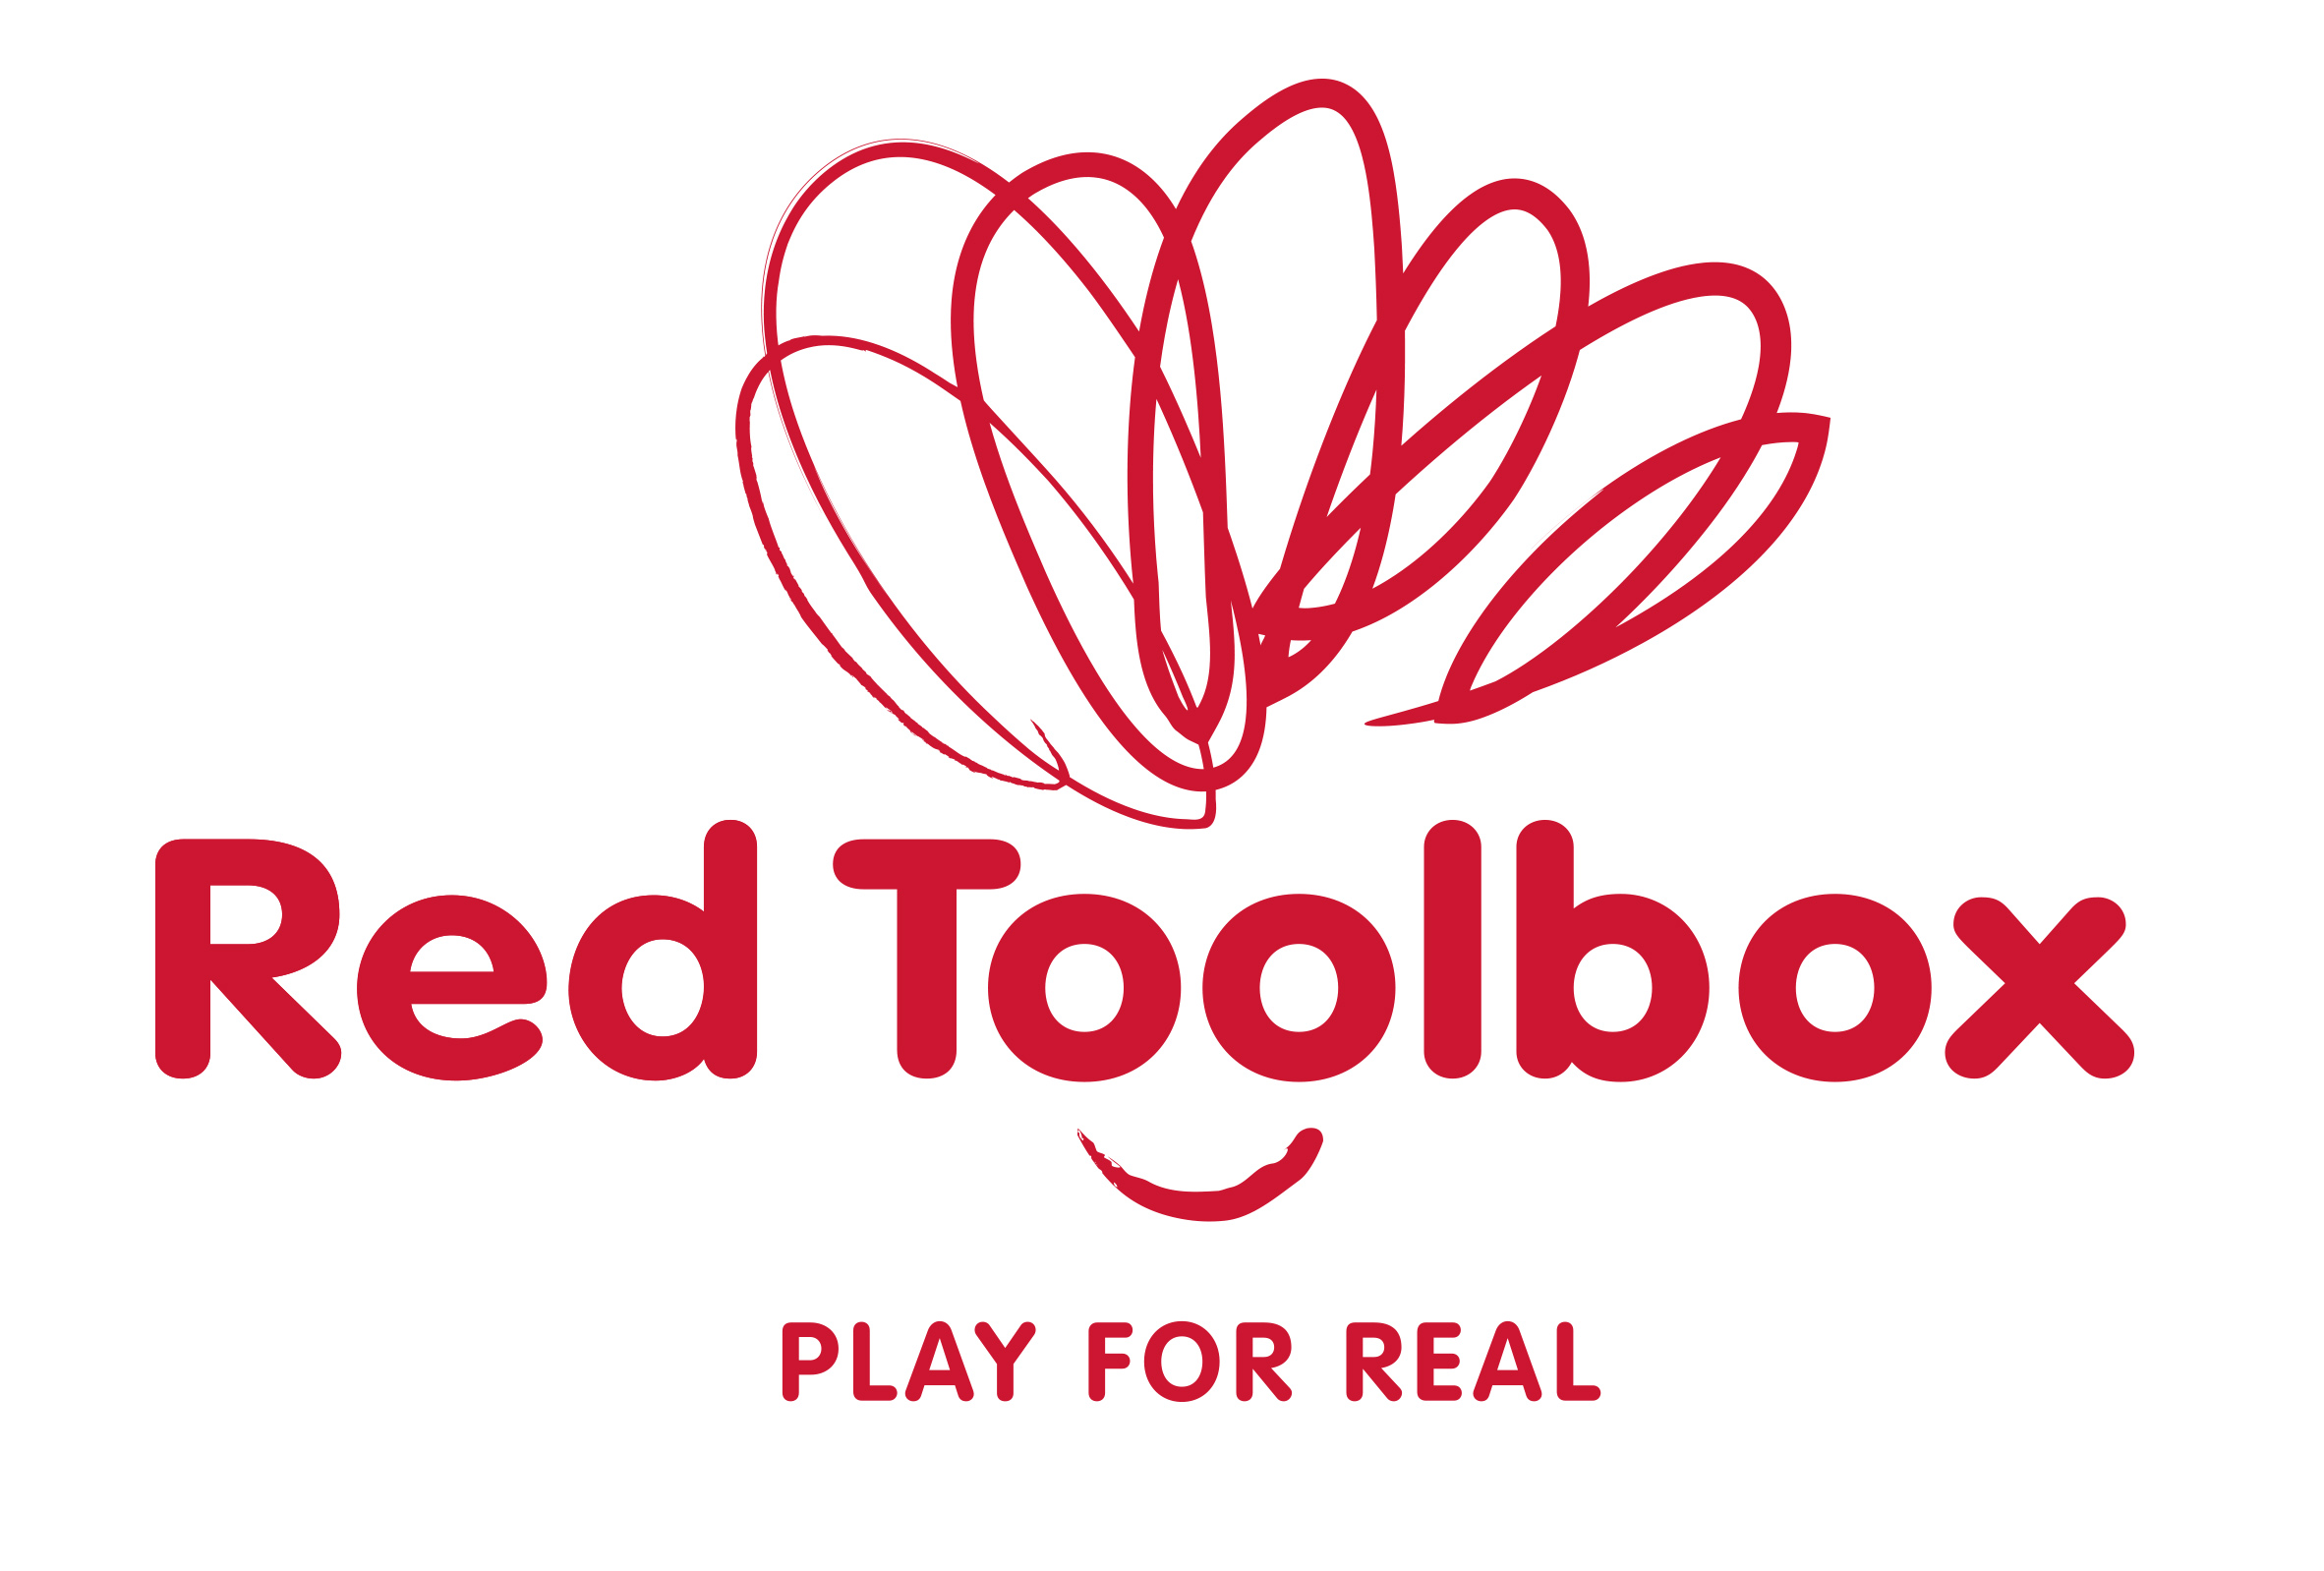 https://www.red-toolbox.com/wp-content/uploads/2022/08/RED-TOOLBOX-LOGO-RED.jpg